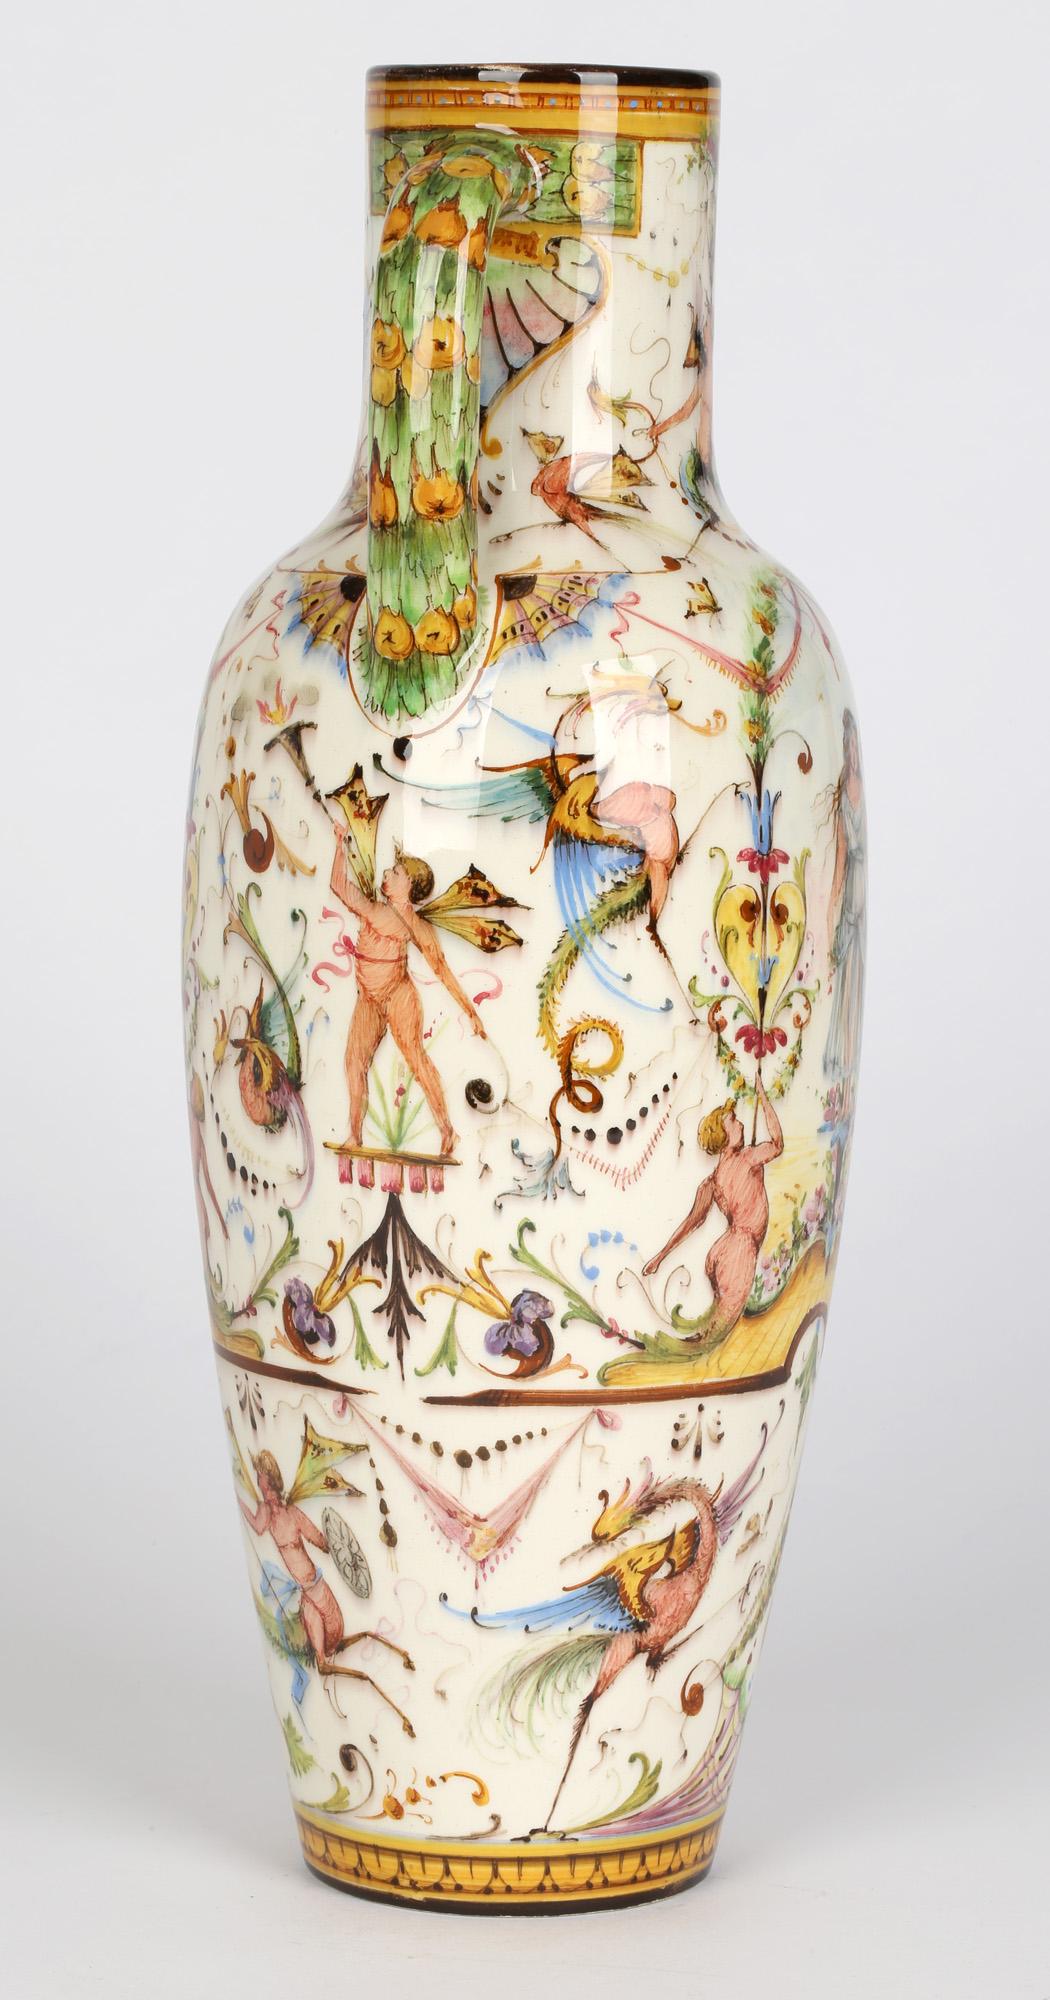 An exceptional and rare French Vallauris twin handled majolica vase hand painted with classical style figures by Delphin Massier and dating from around 1890. This tall and elegant slender vase is lightly potted with a rounded bulbous body tapering